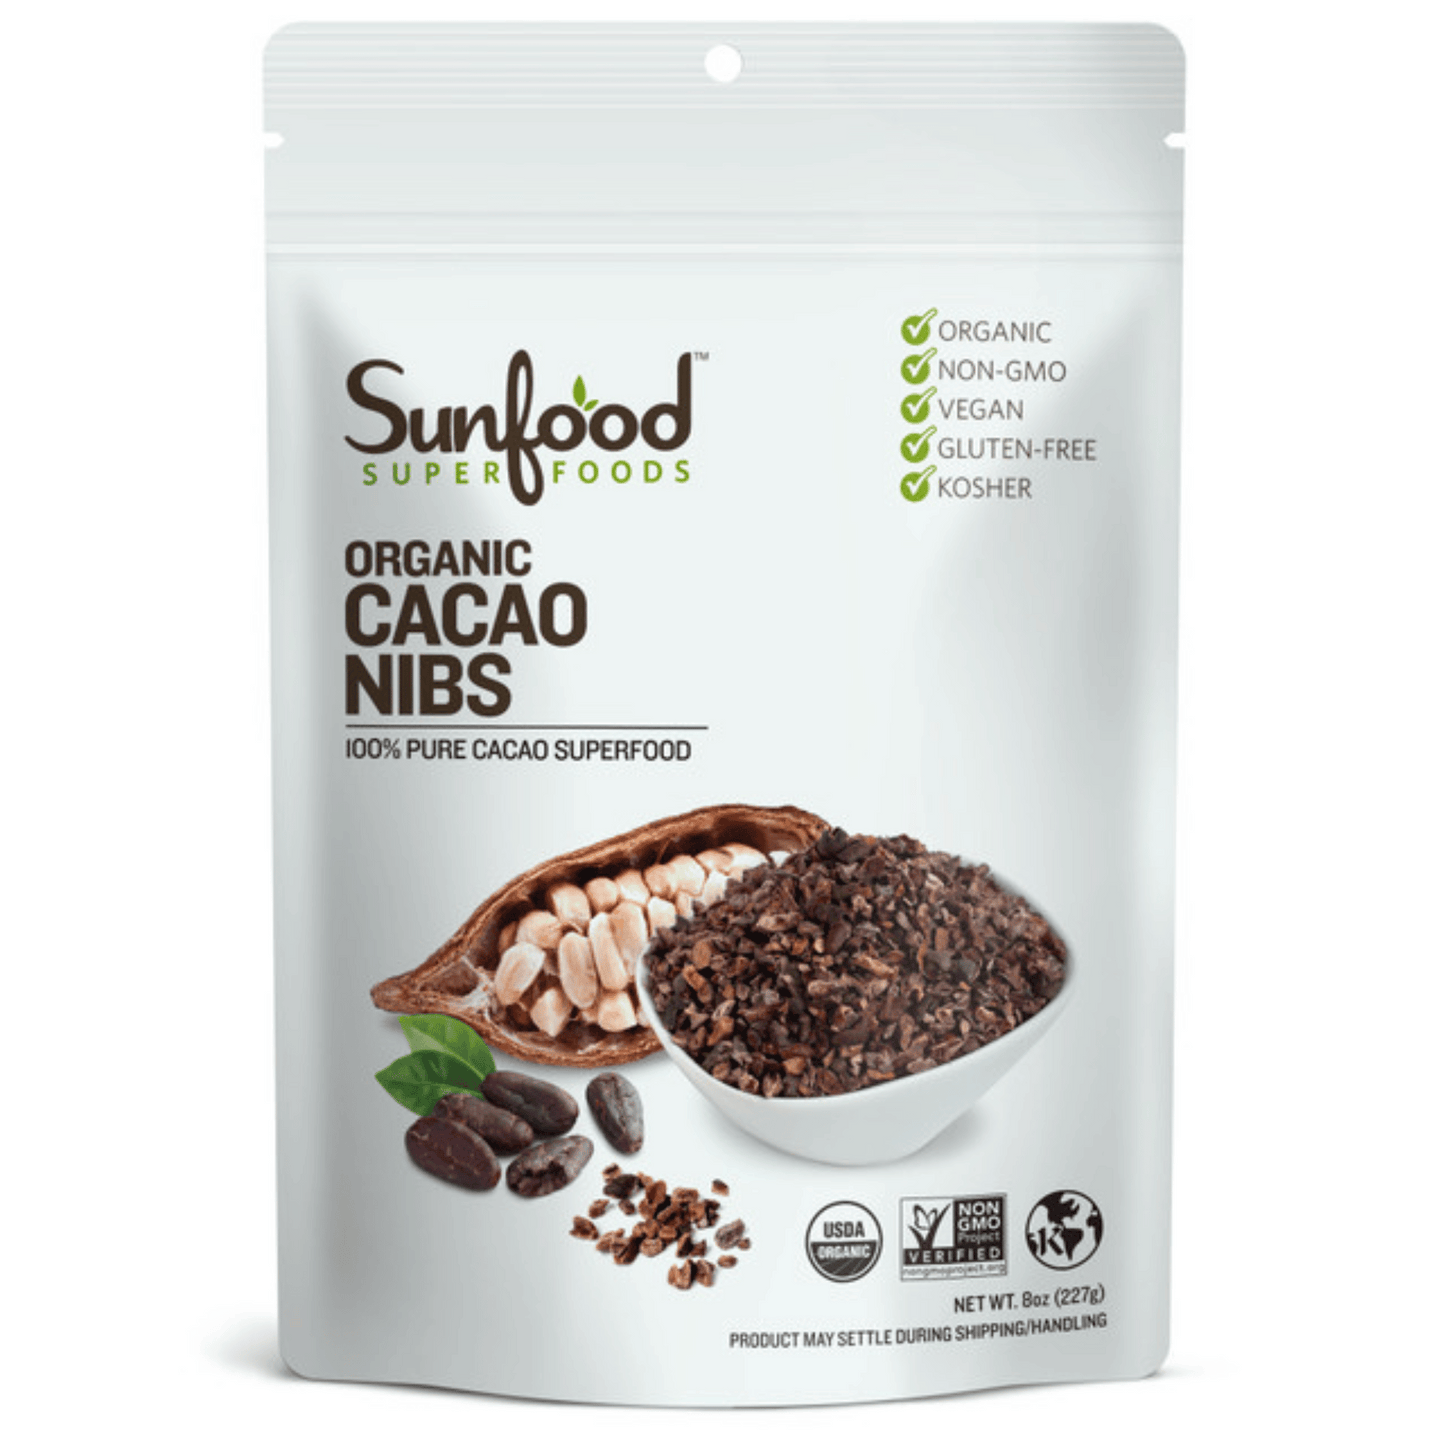 Primary Image of Organic Cacao Nibs